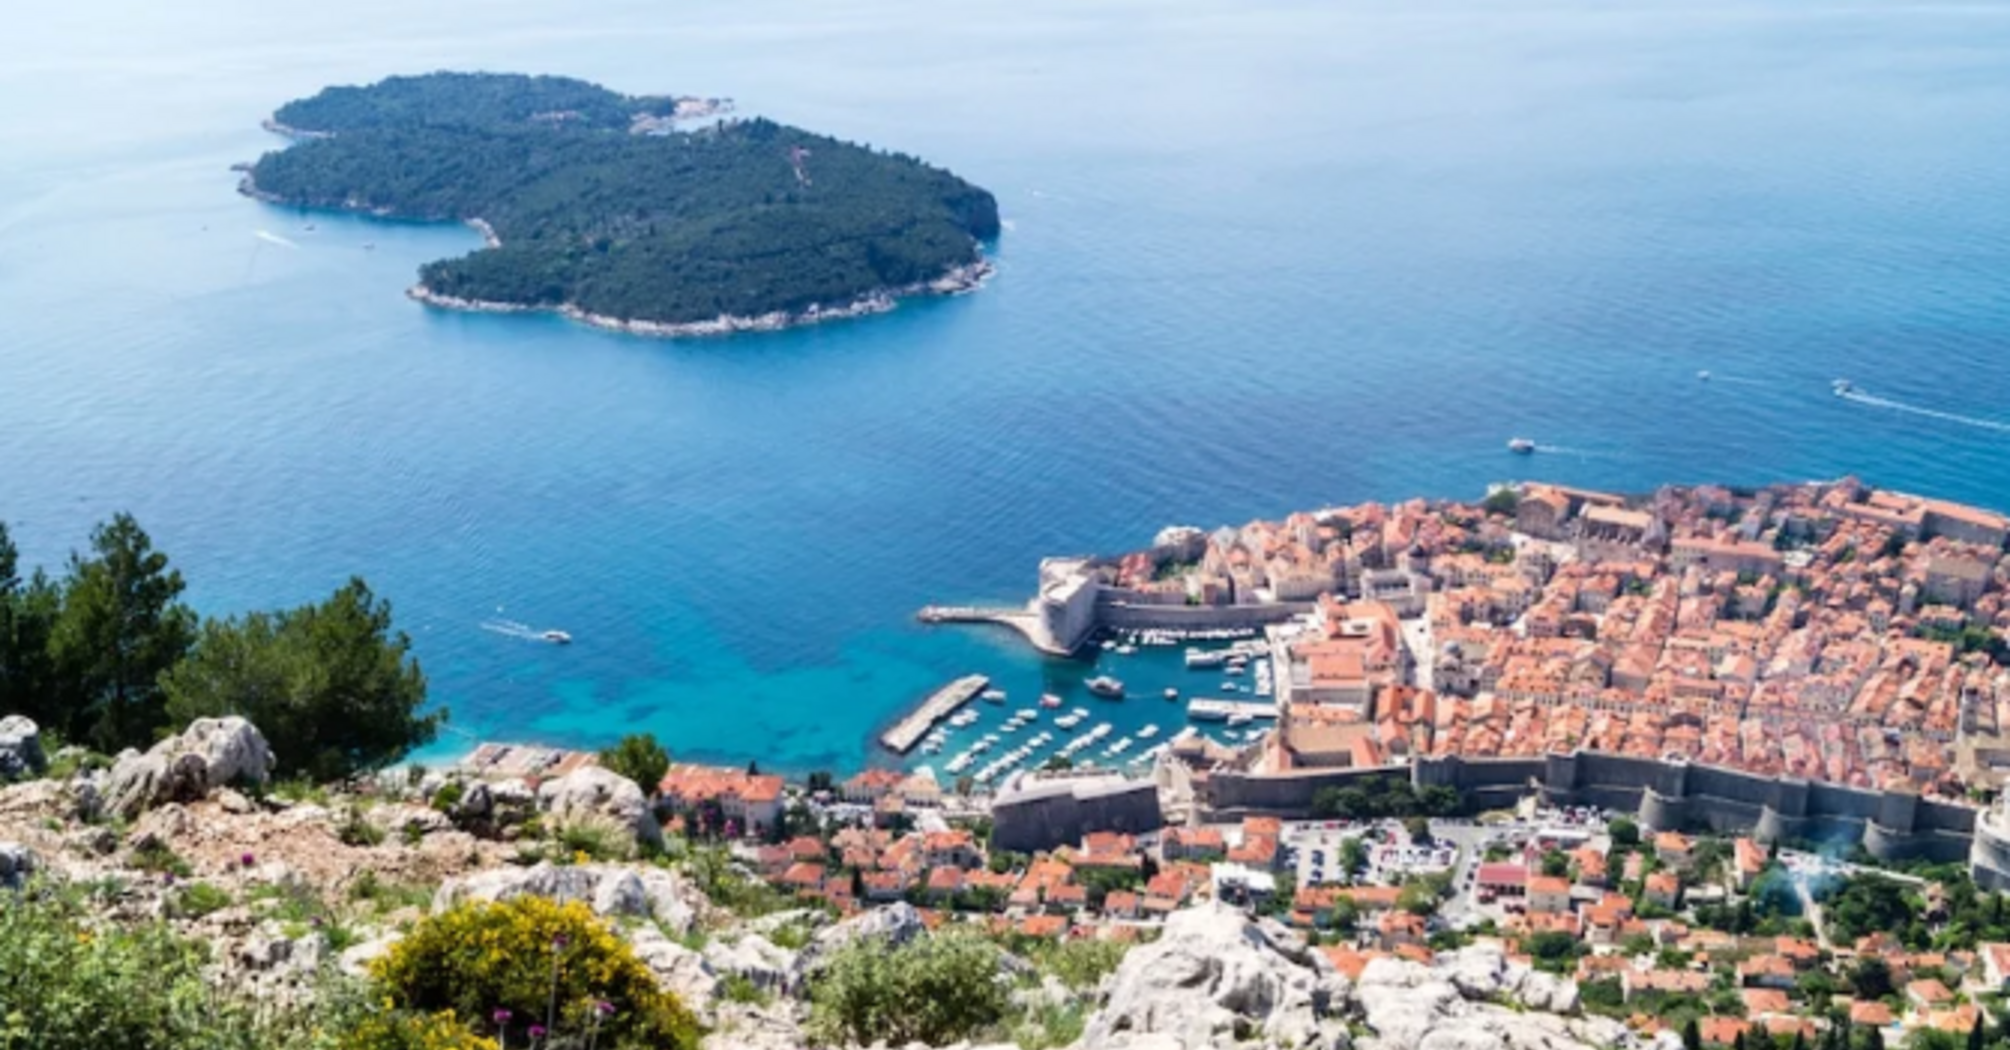 Vacation in Dubrovnik